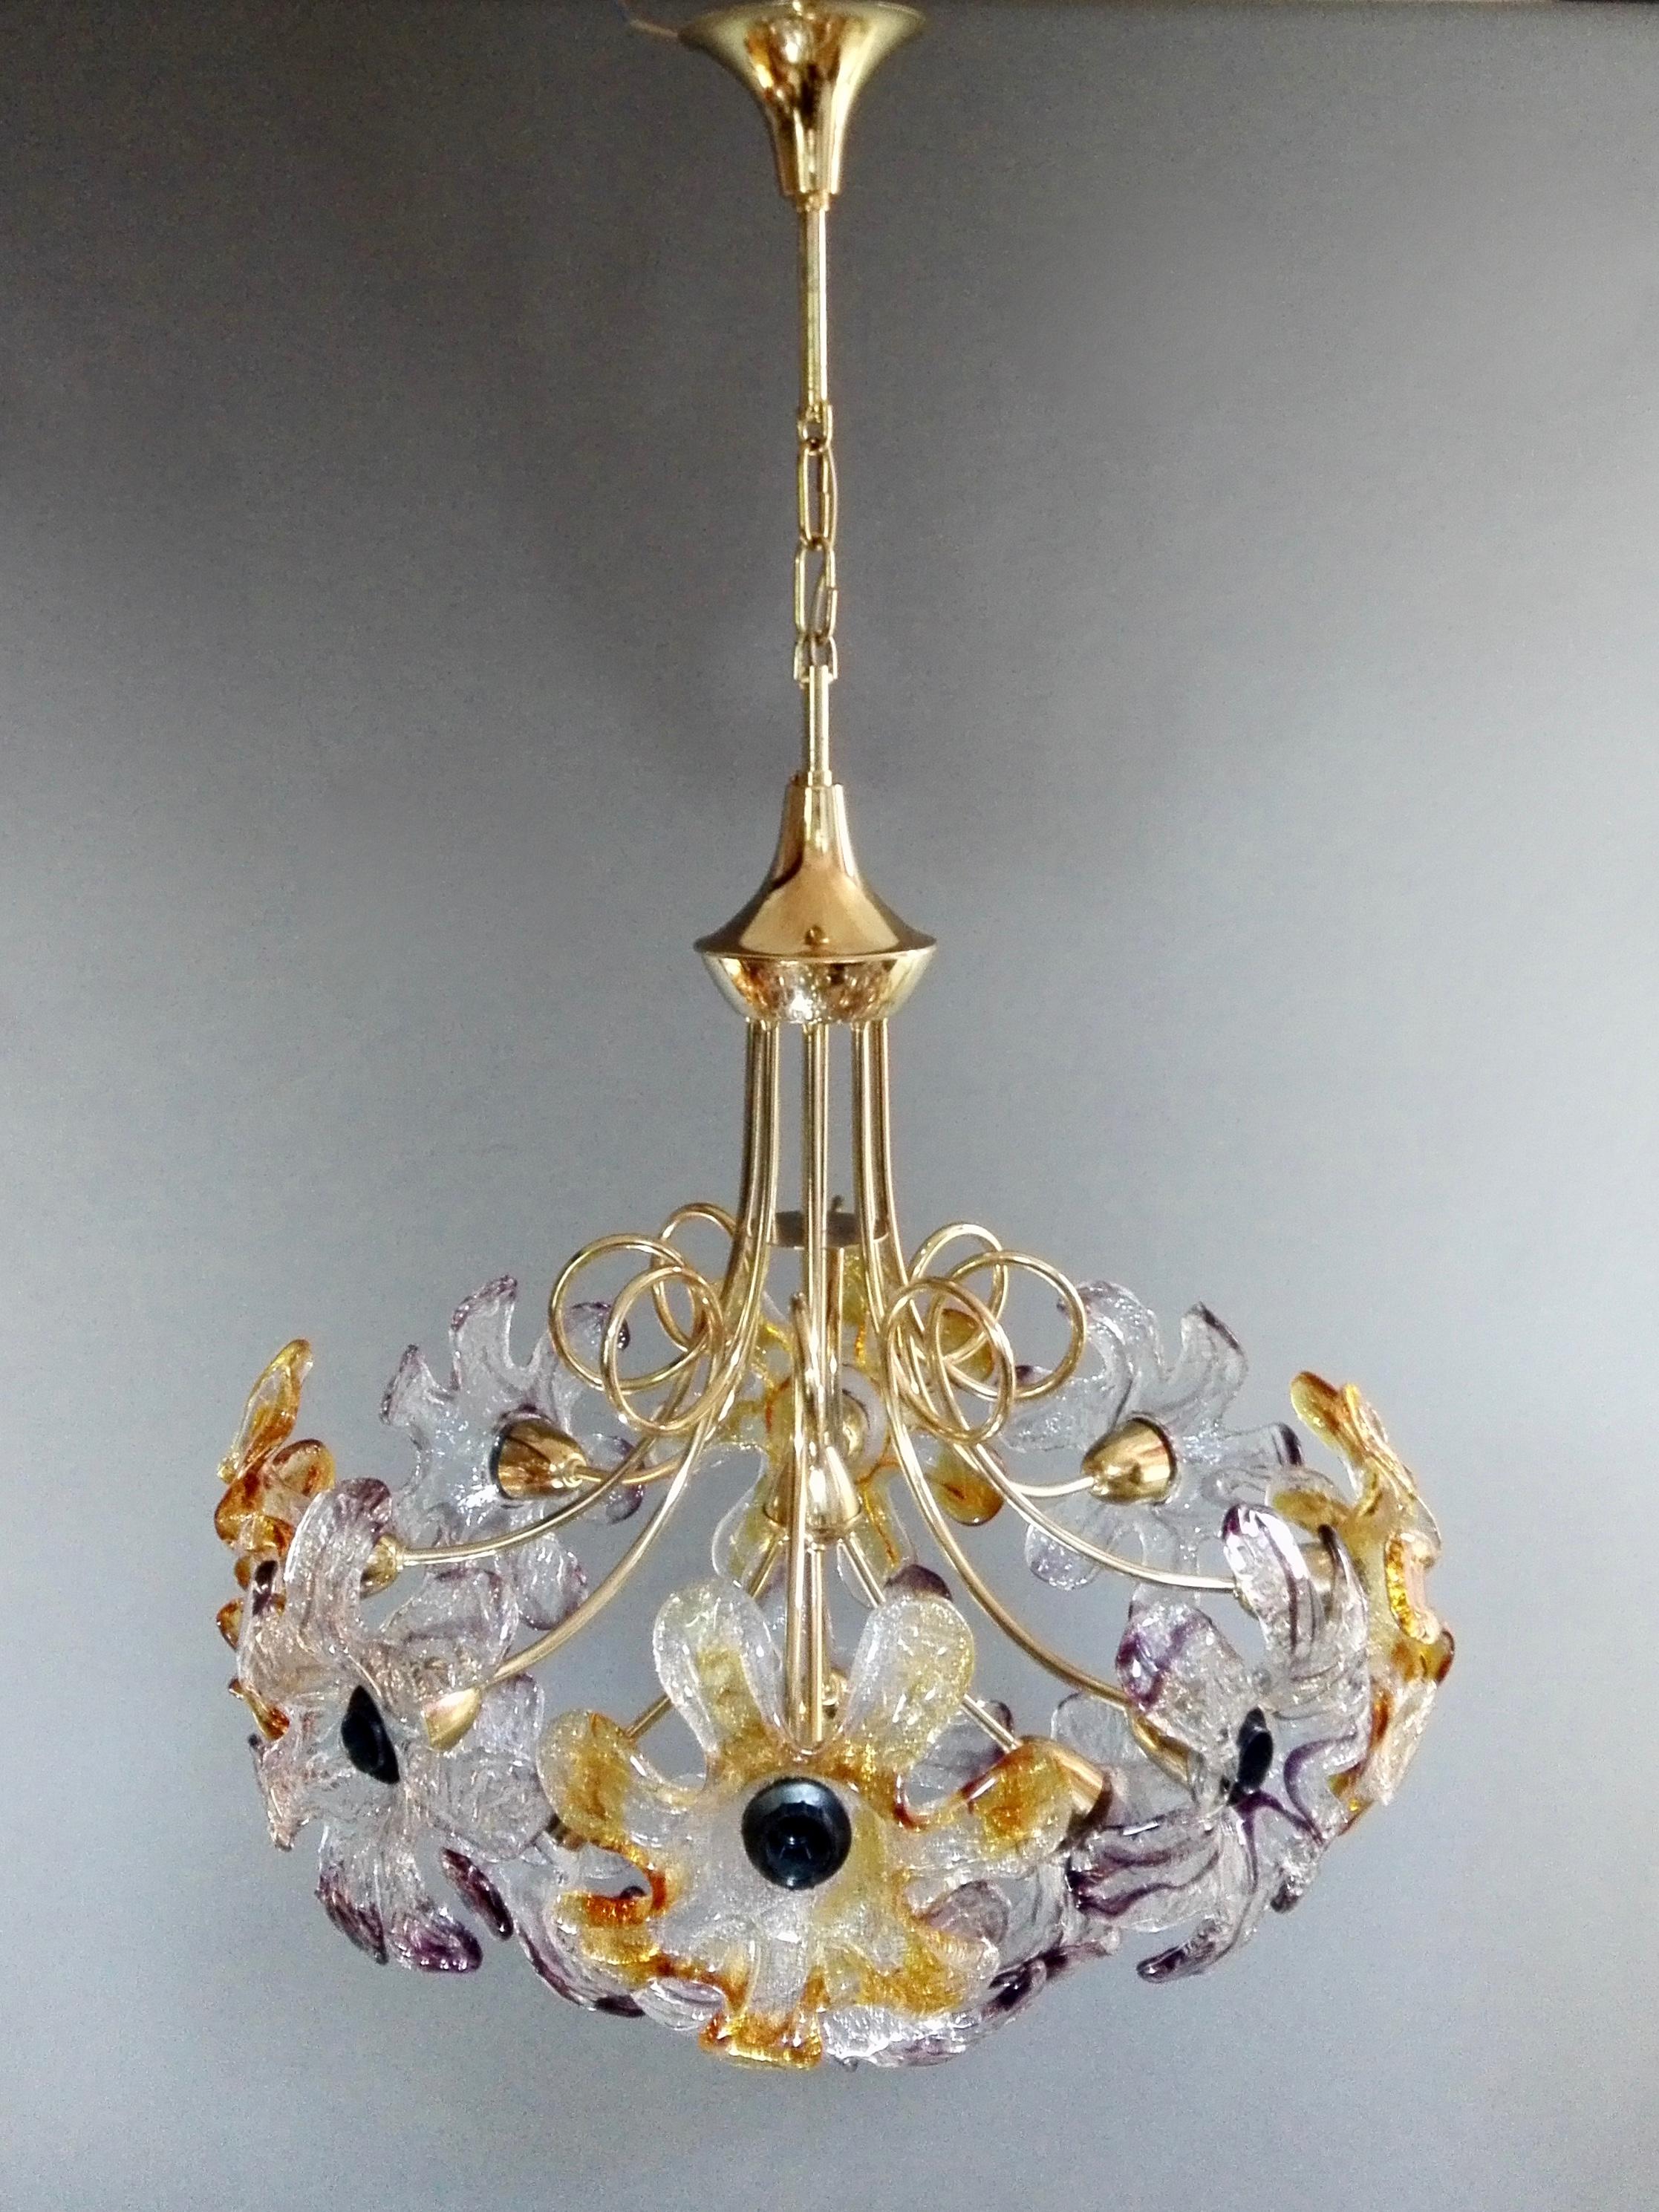 1960s Mazzega Twelve-Light Chandelier with Flower-Shaped Murano Art Glass Shades In Good Condition For Sale In Caprino Veronese, VR